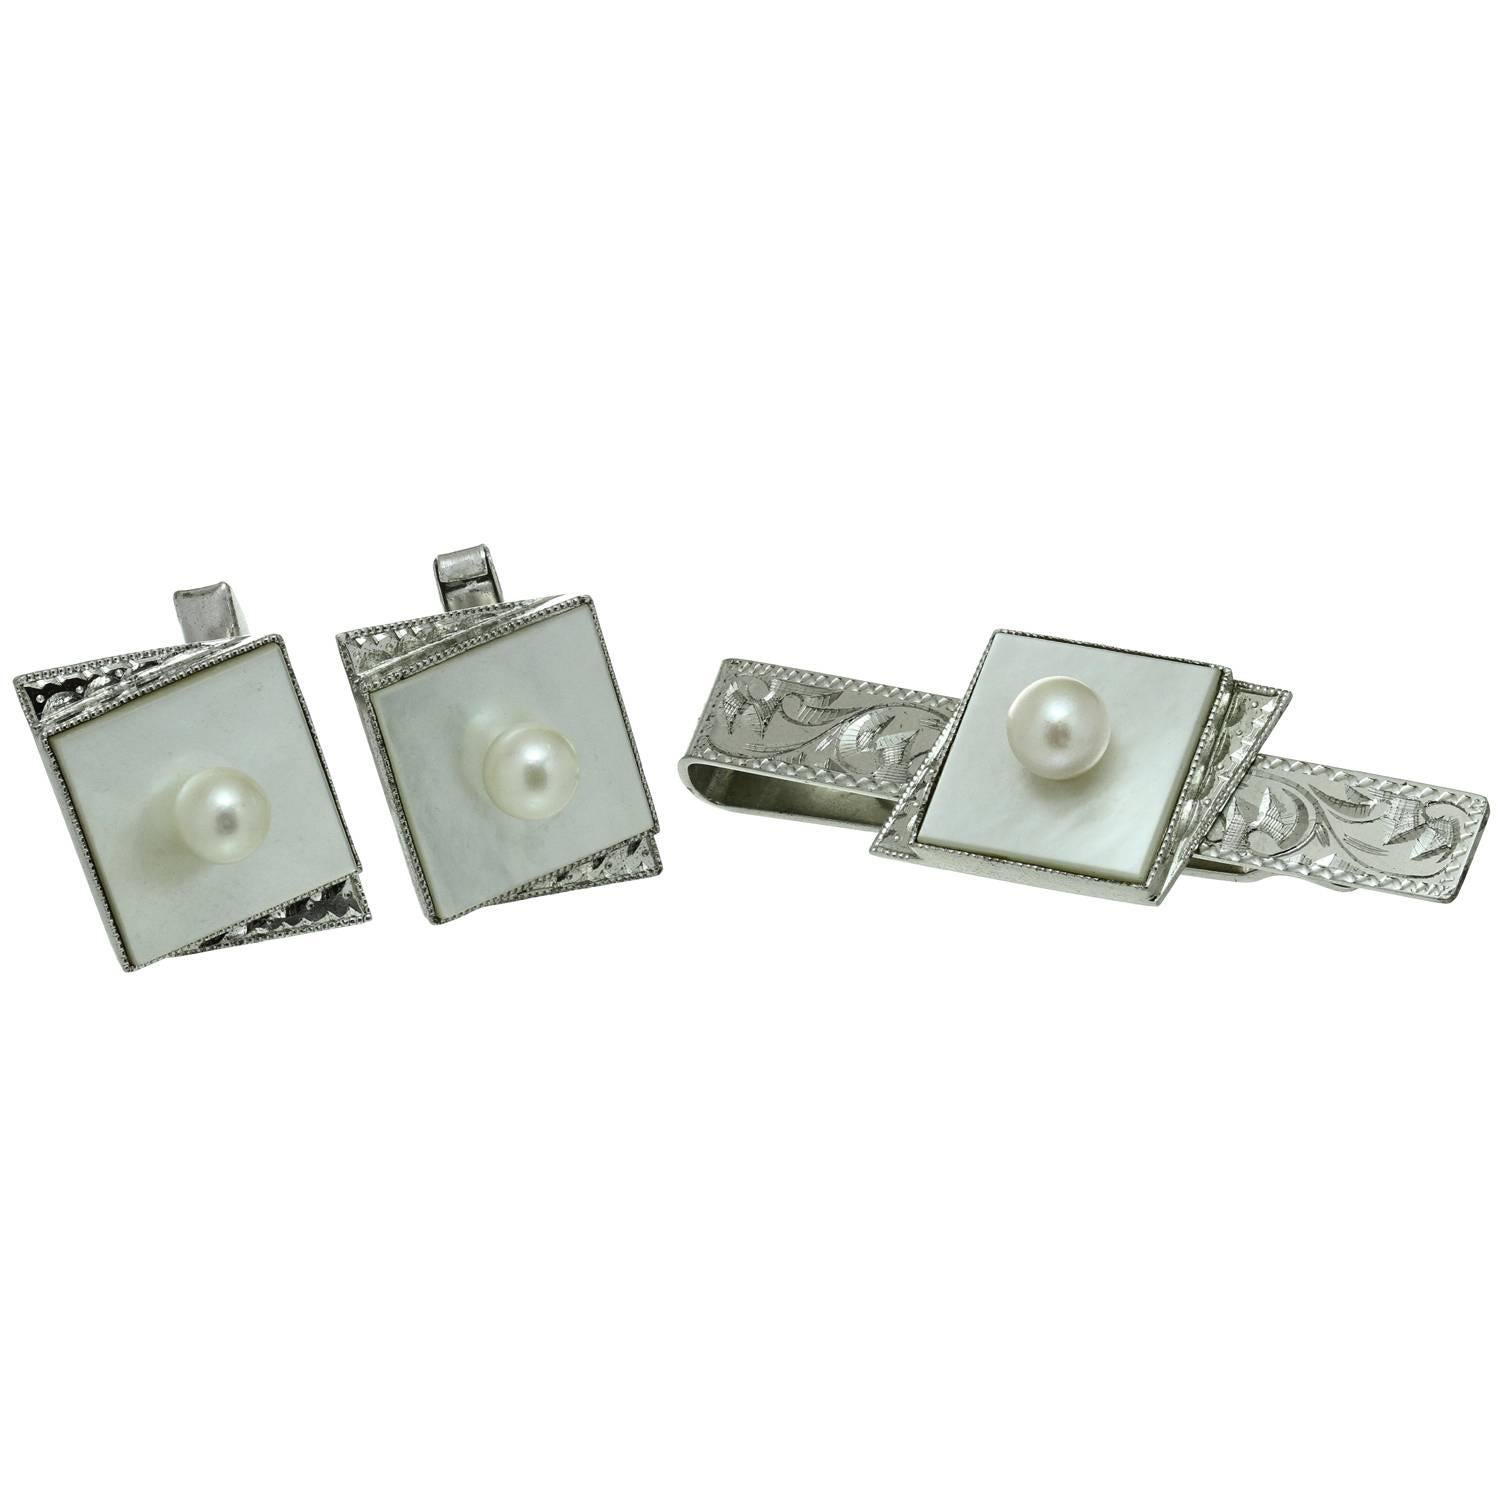 Pearl Mother-of-Pearl Sterling Silver Cufflinks and Tie Clip Set